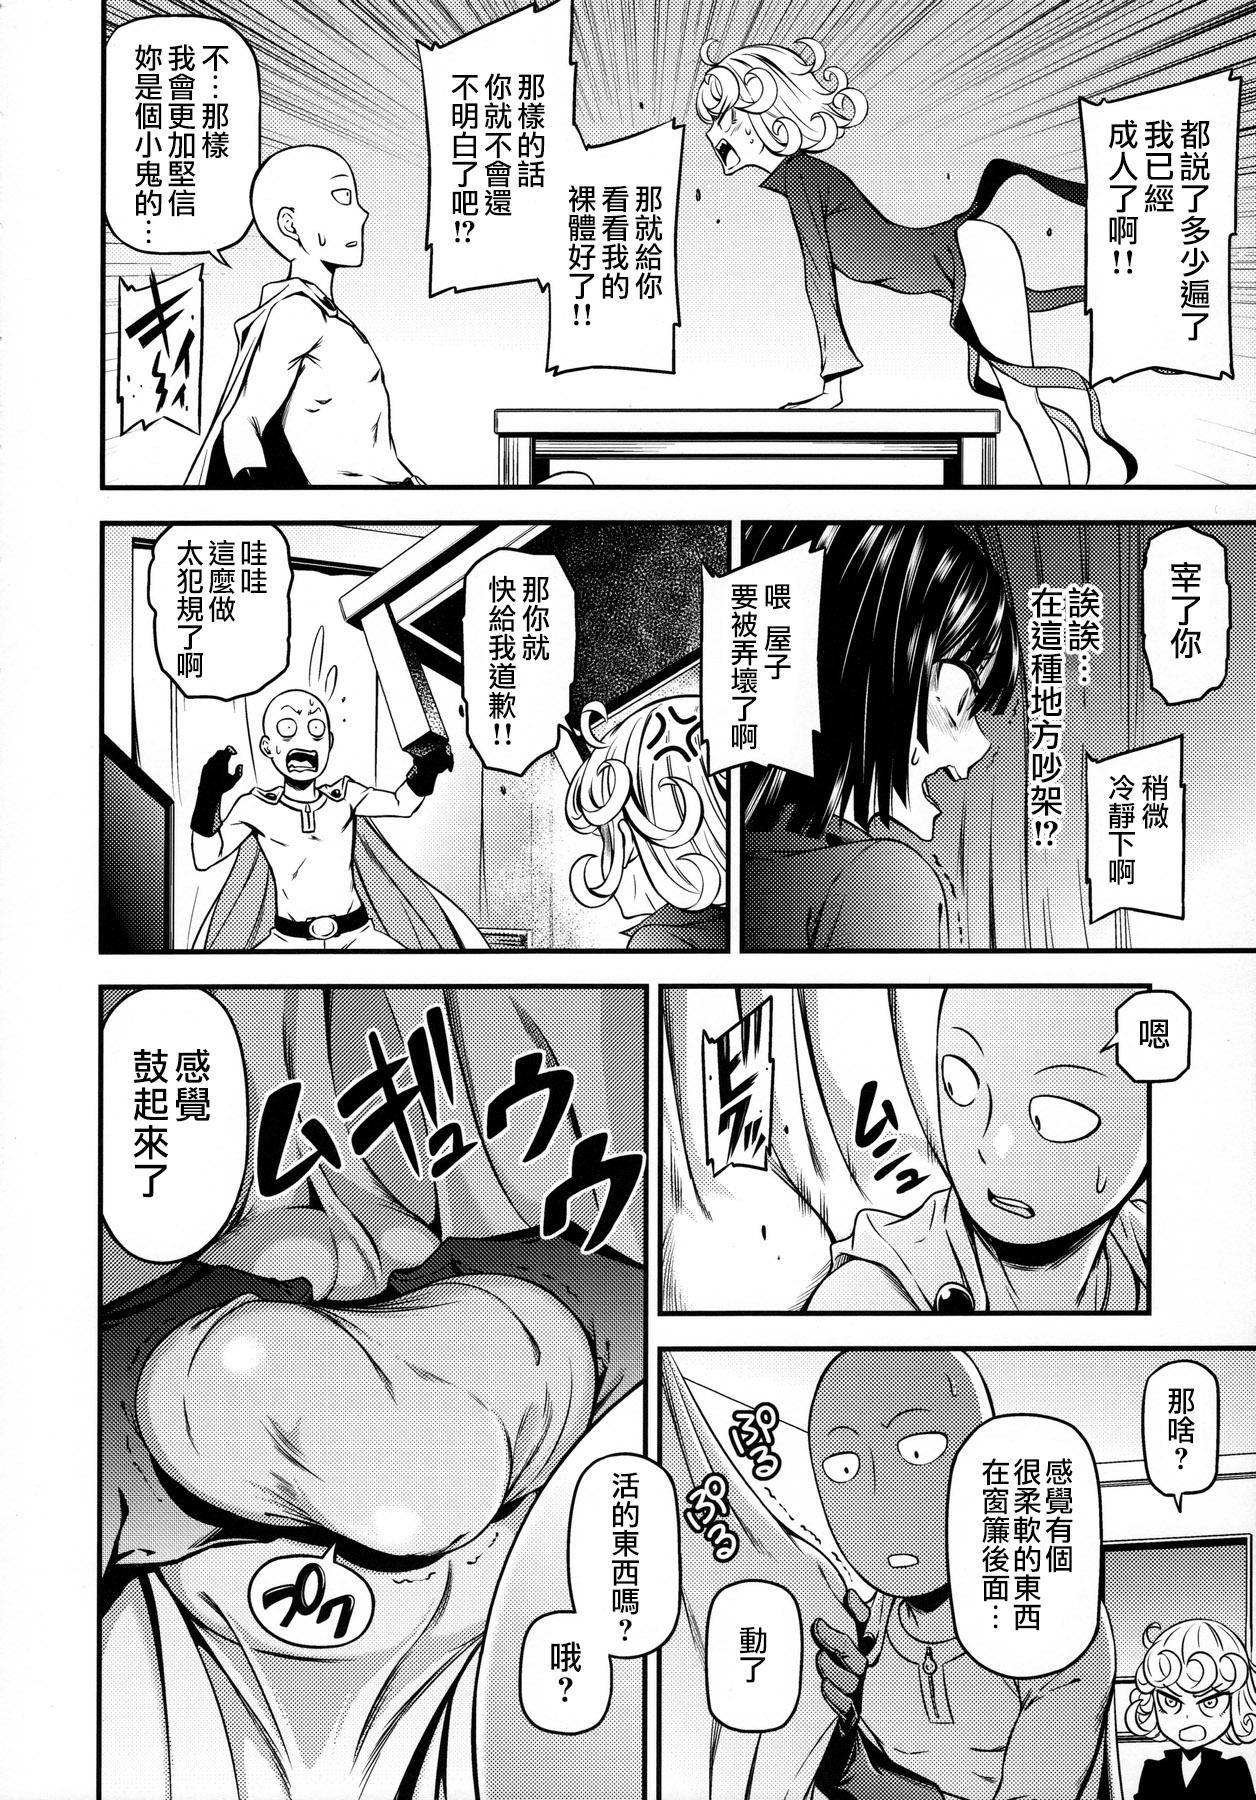 Fuck Her Hard ONE-HURRICANE 4 - One punch man Hiddencam - Page 5